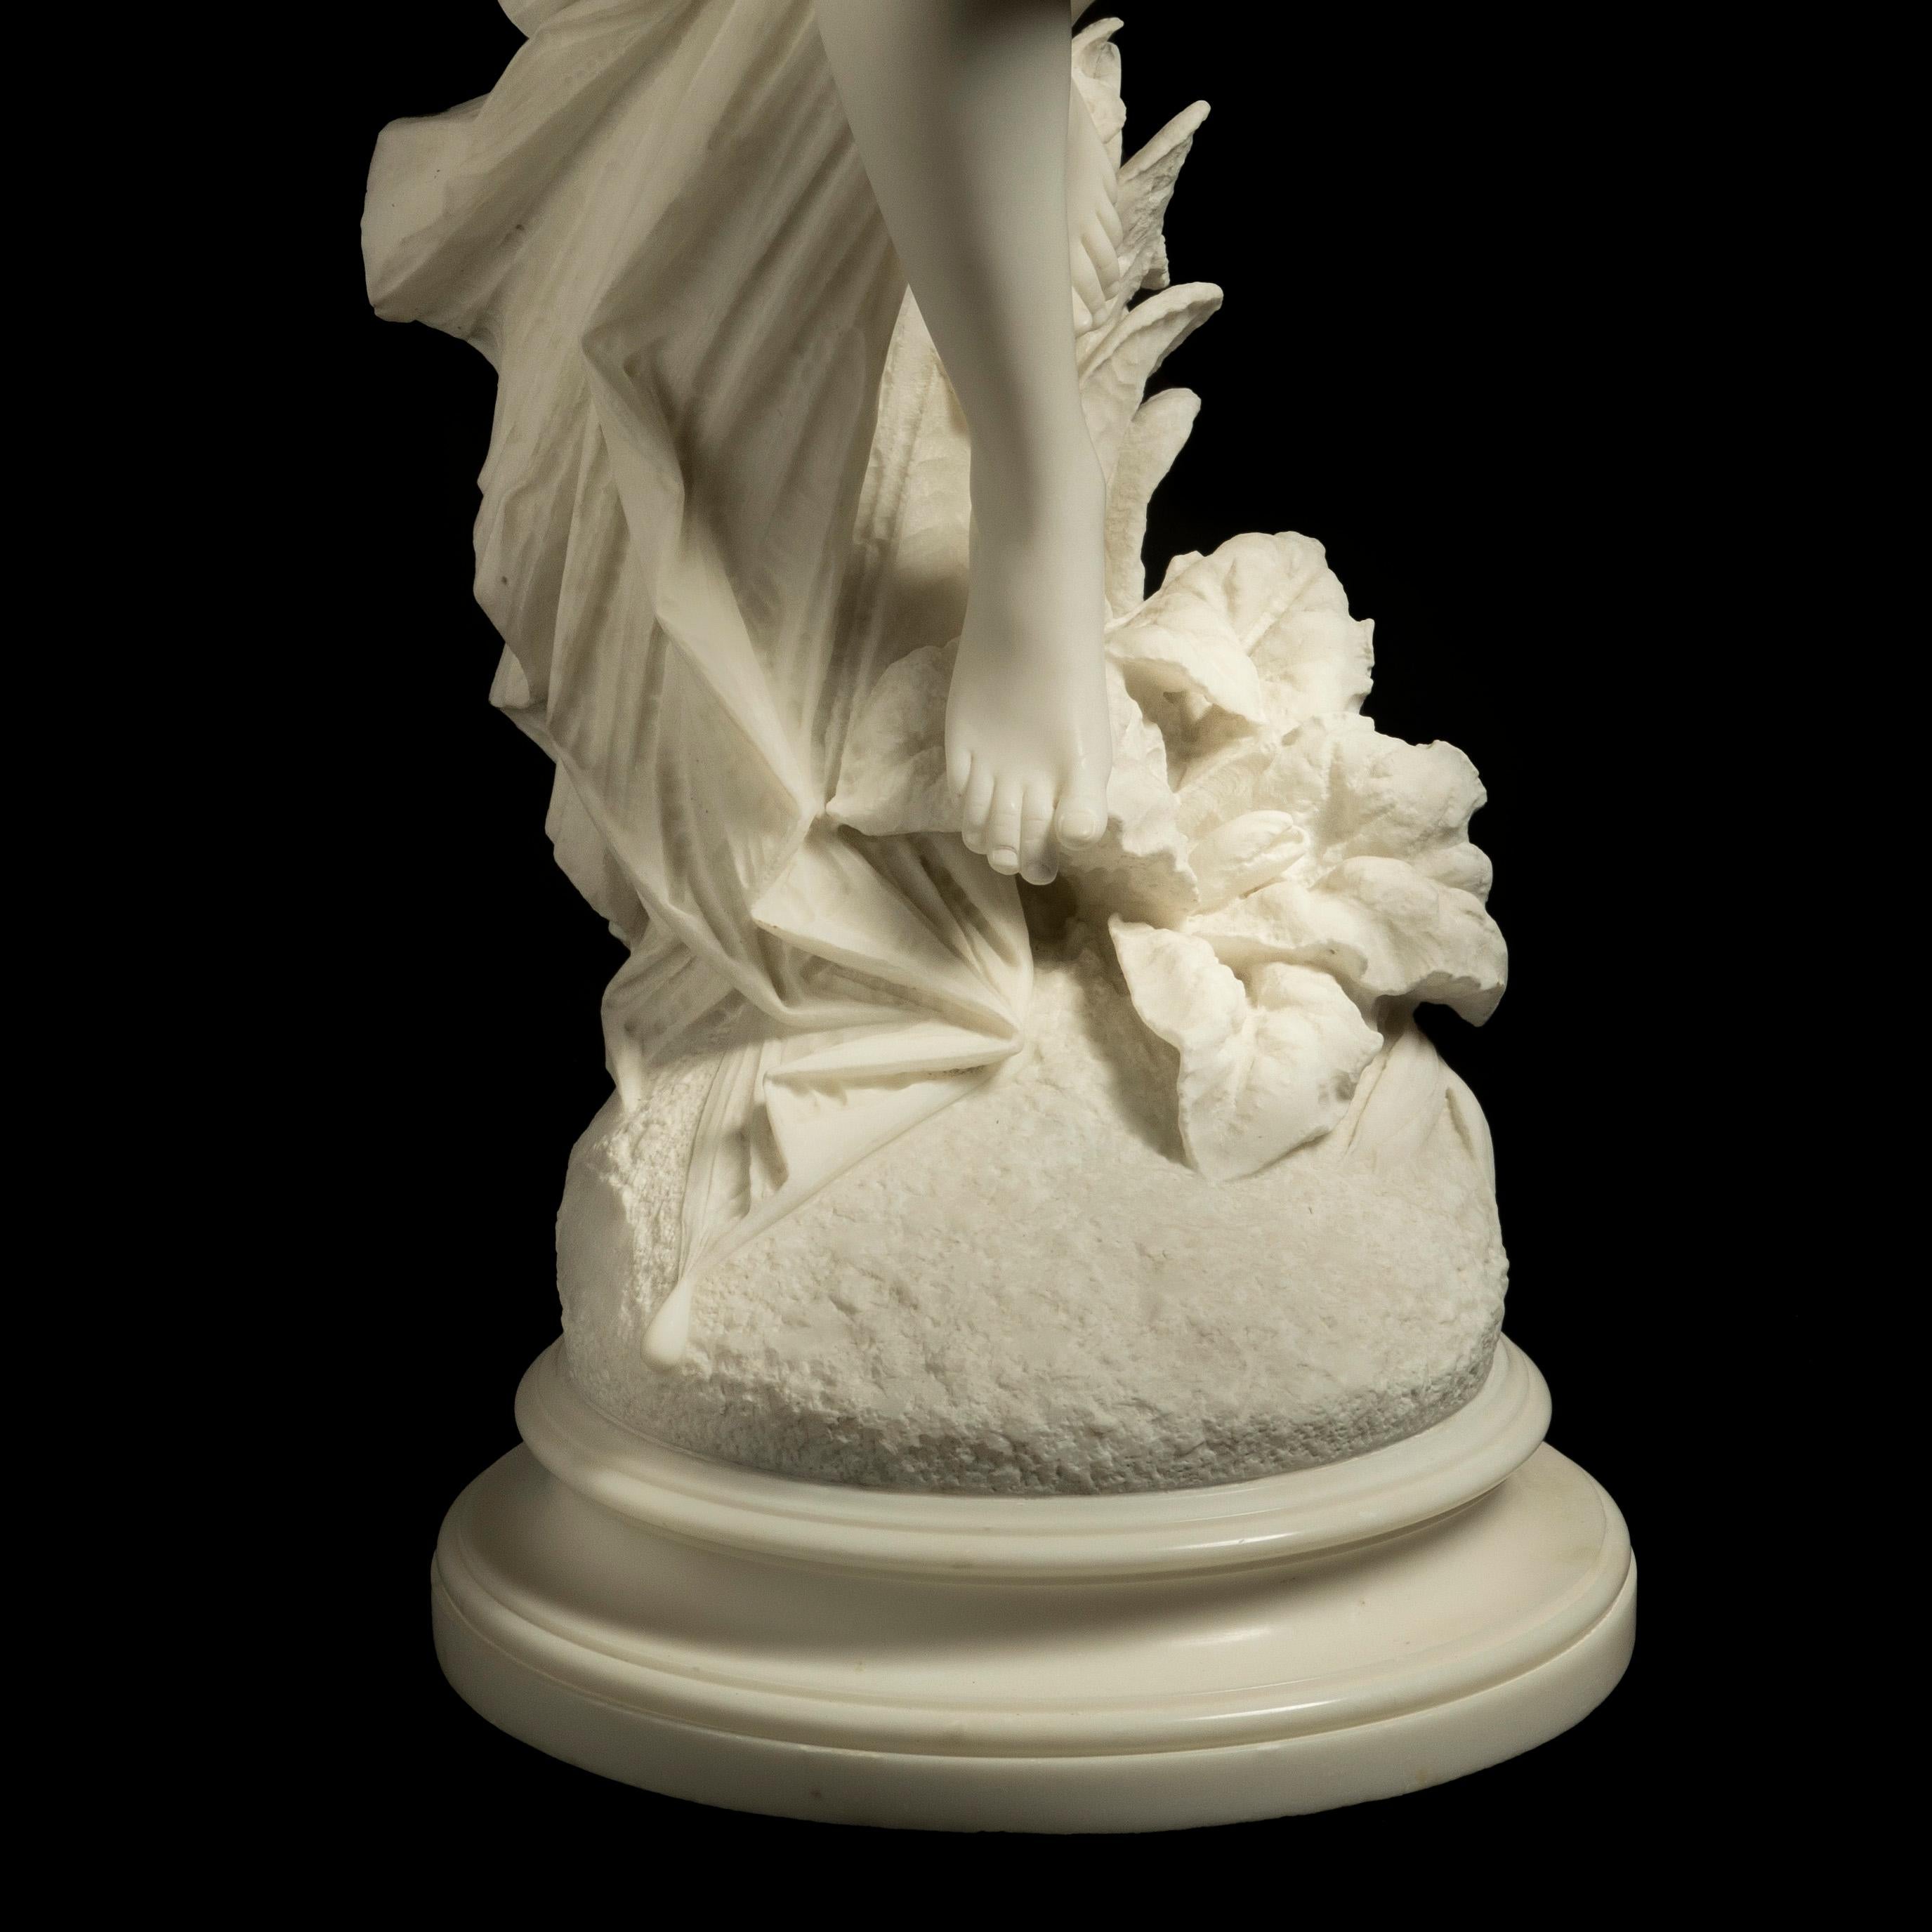 19th Century Italian Nearly Life-Size Marble Sculpture of Pandora by F. Andreini For Sale 4